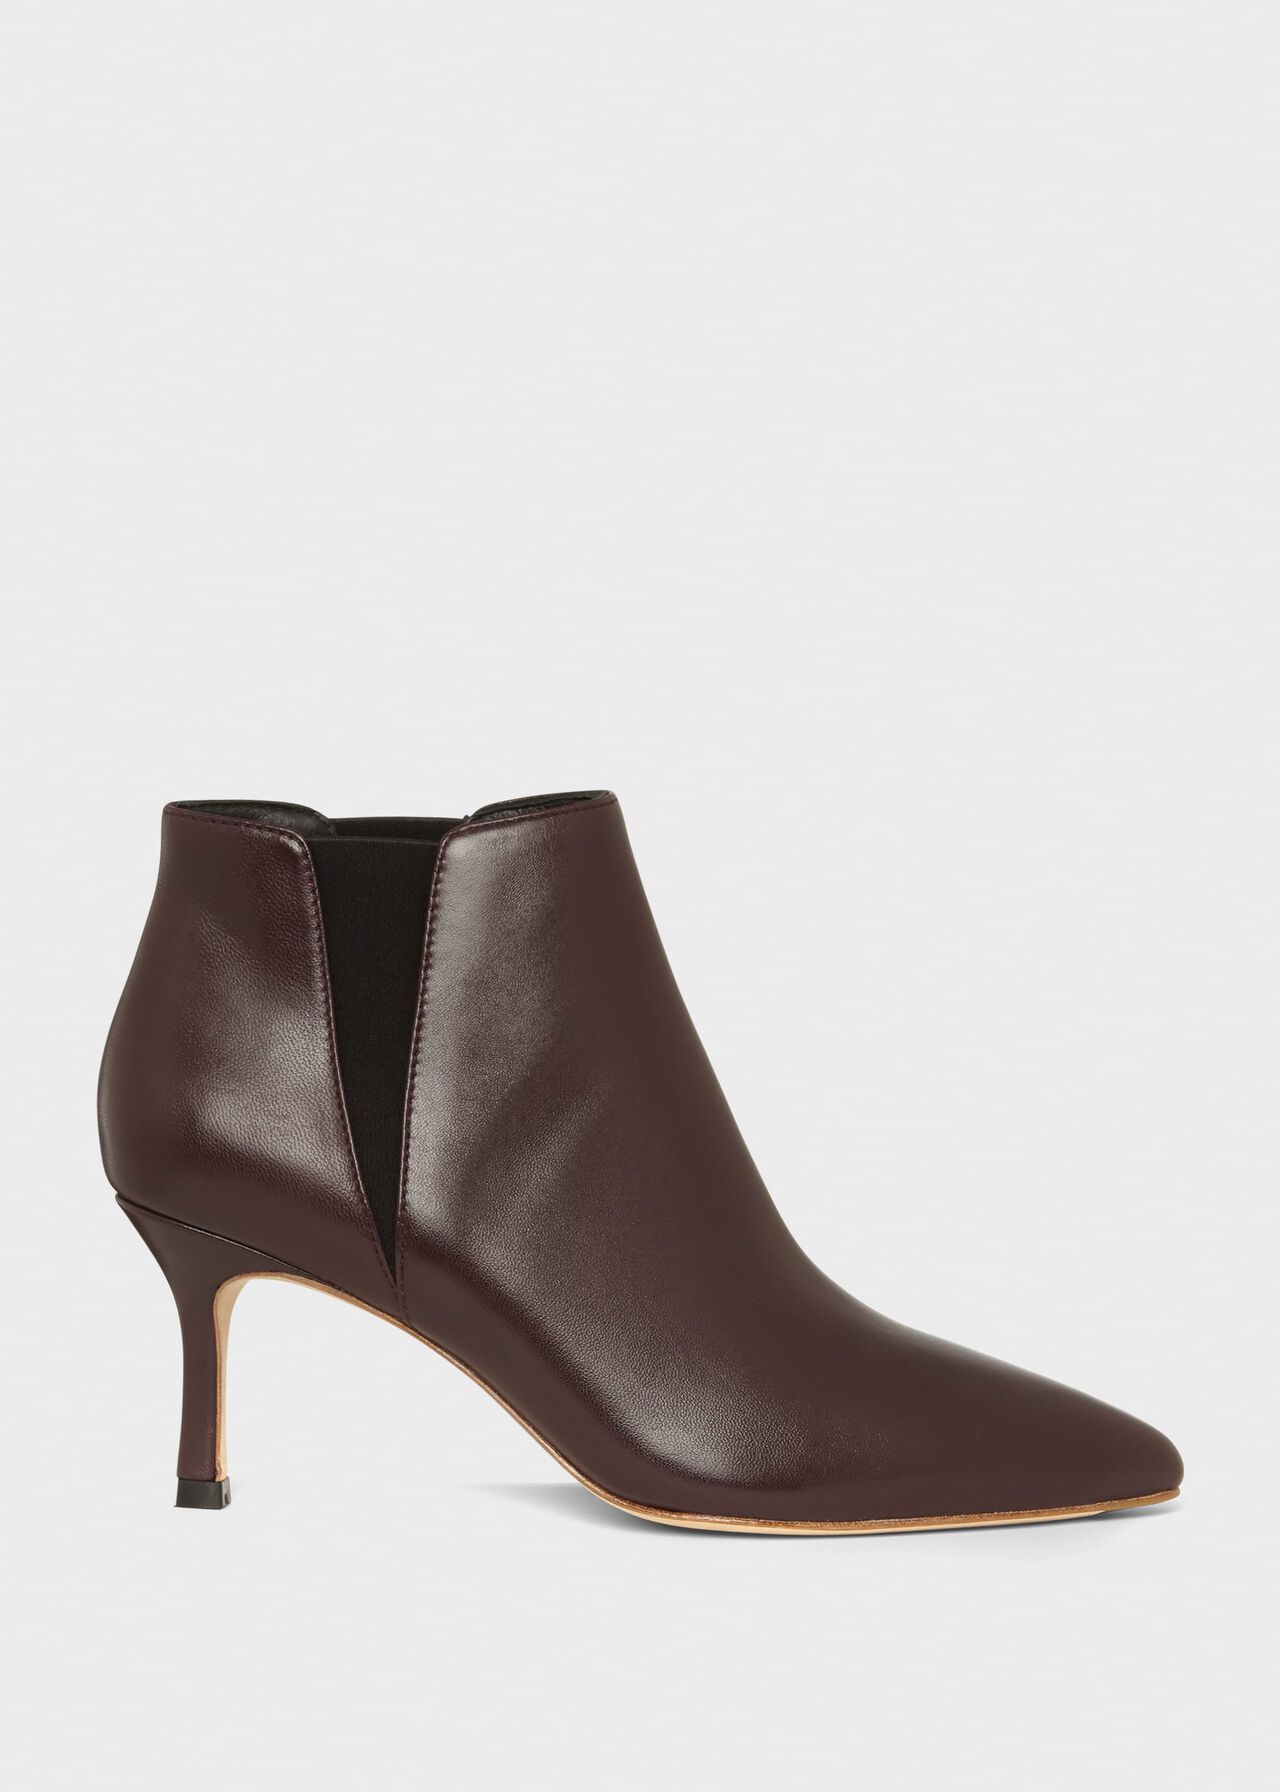 Vita Leather Ankle Boots, Burgundy, hi-res